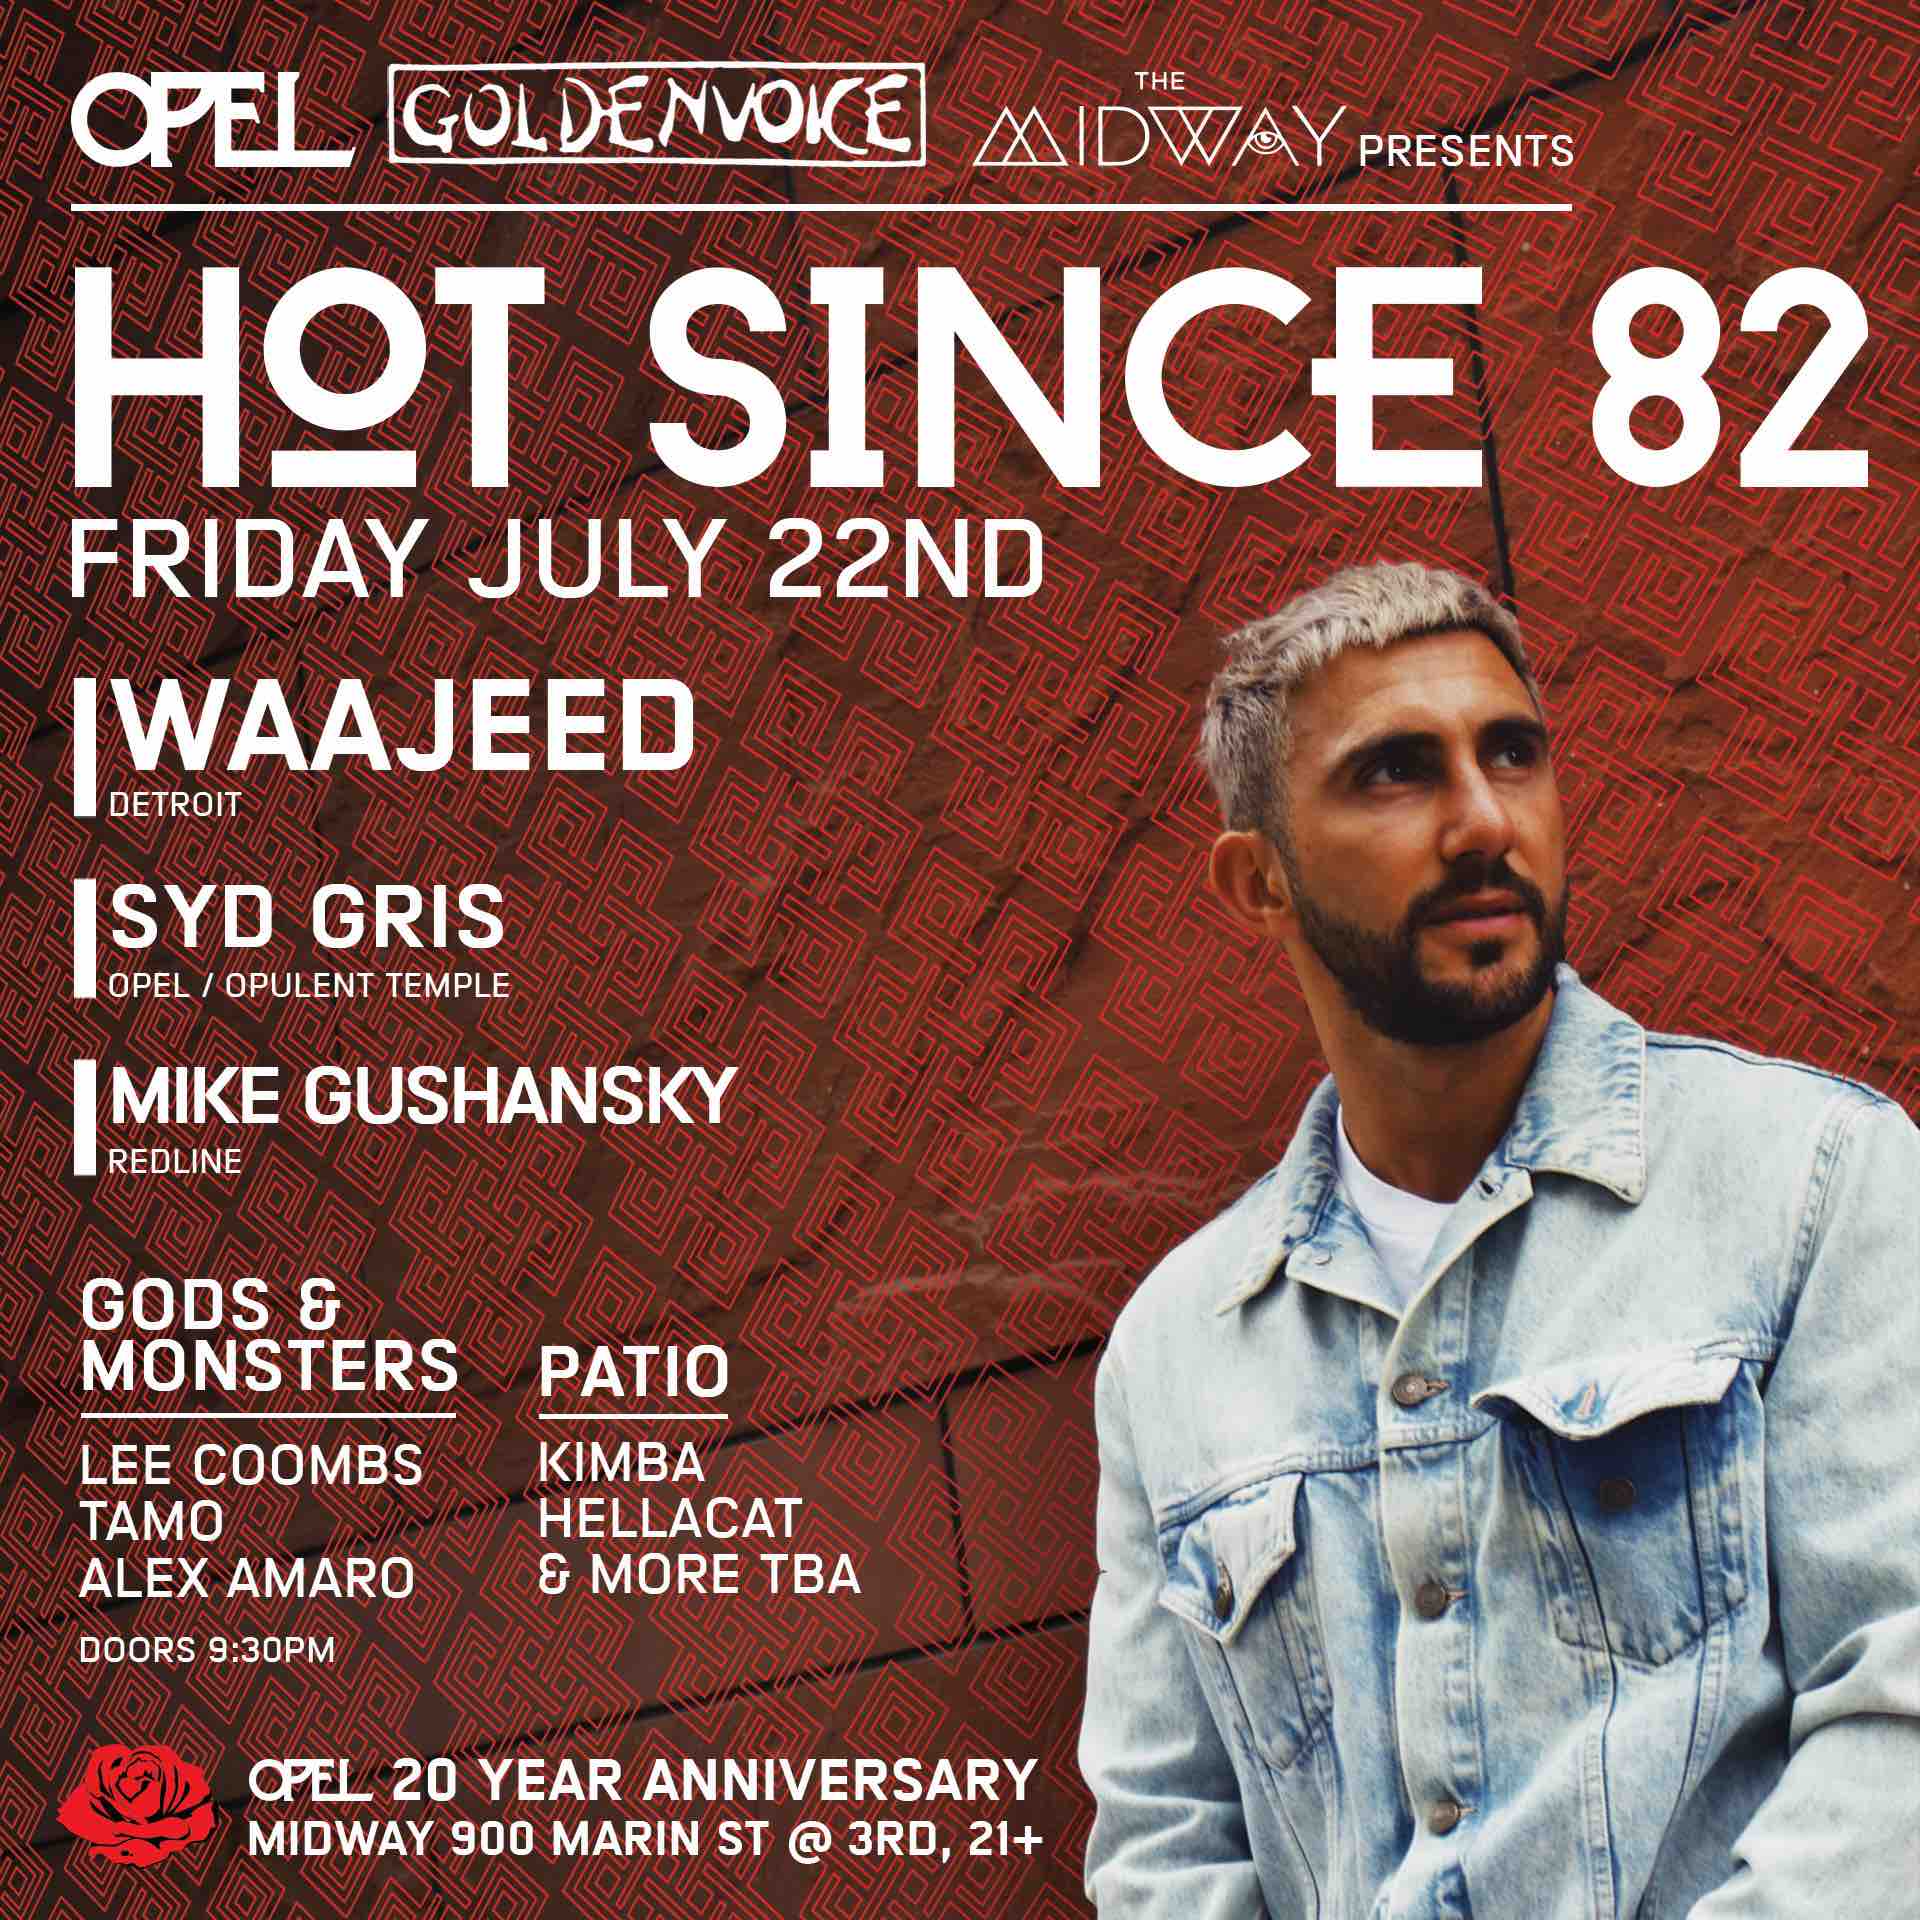 Opel Presents Hot Since 82 at The Midway Tickets at The Midway in San